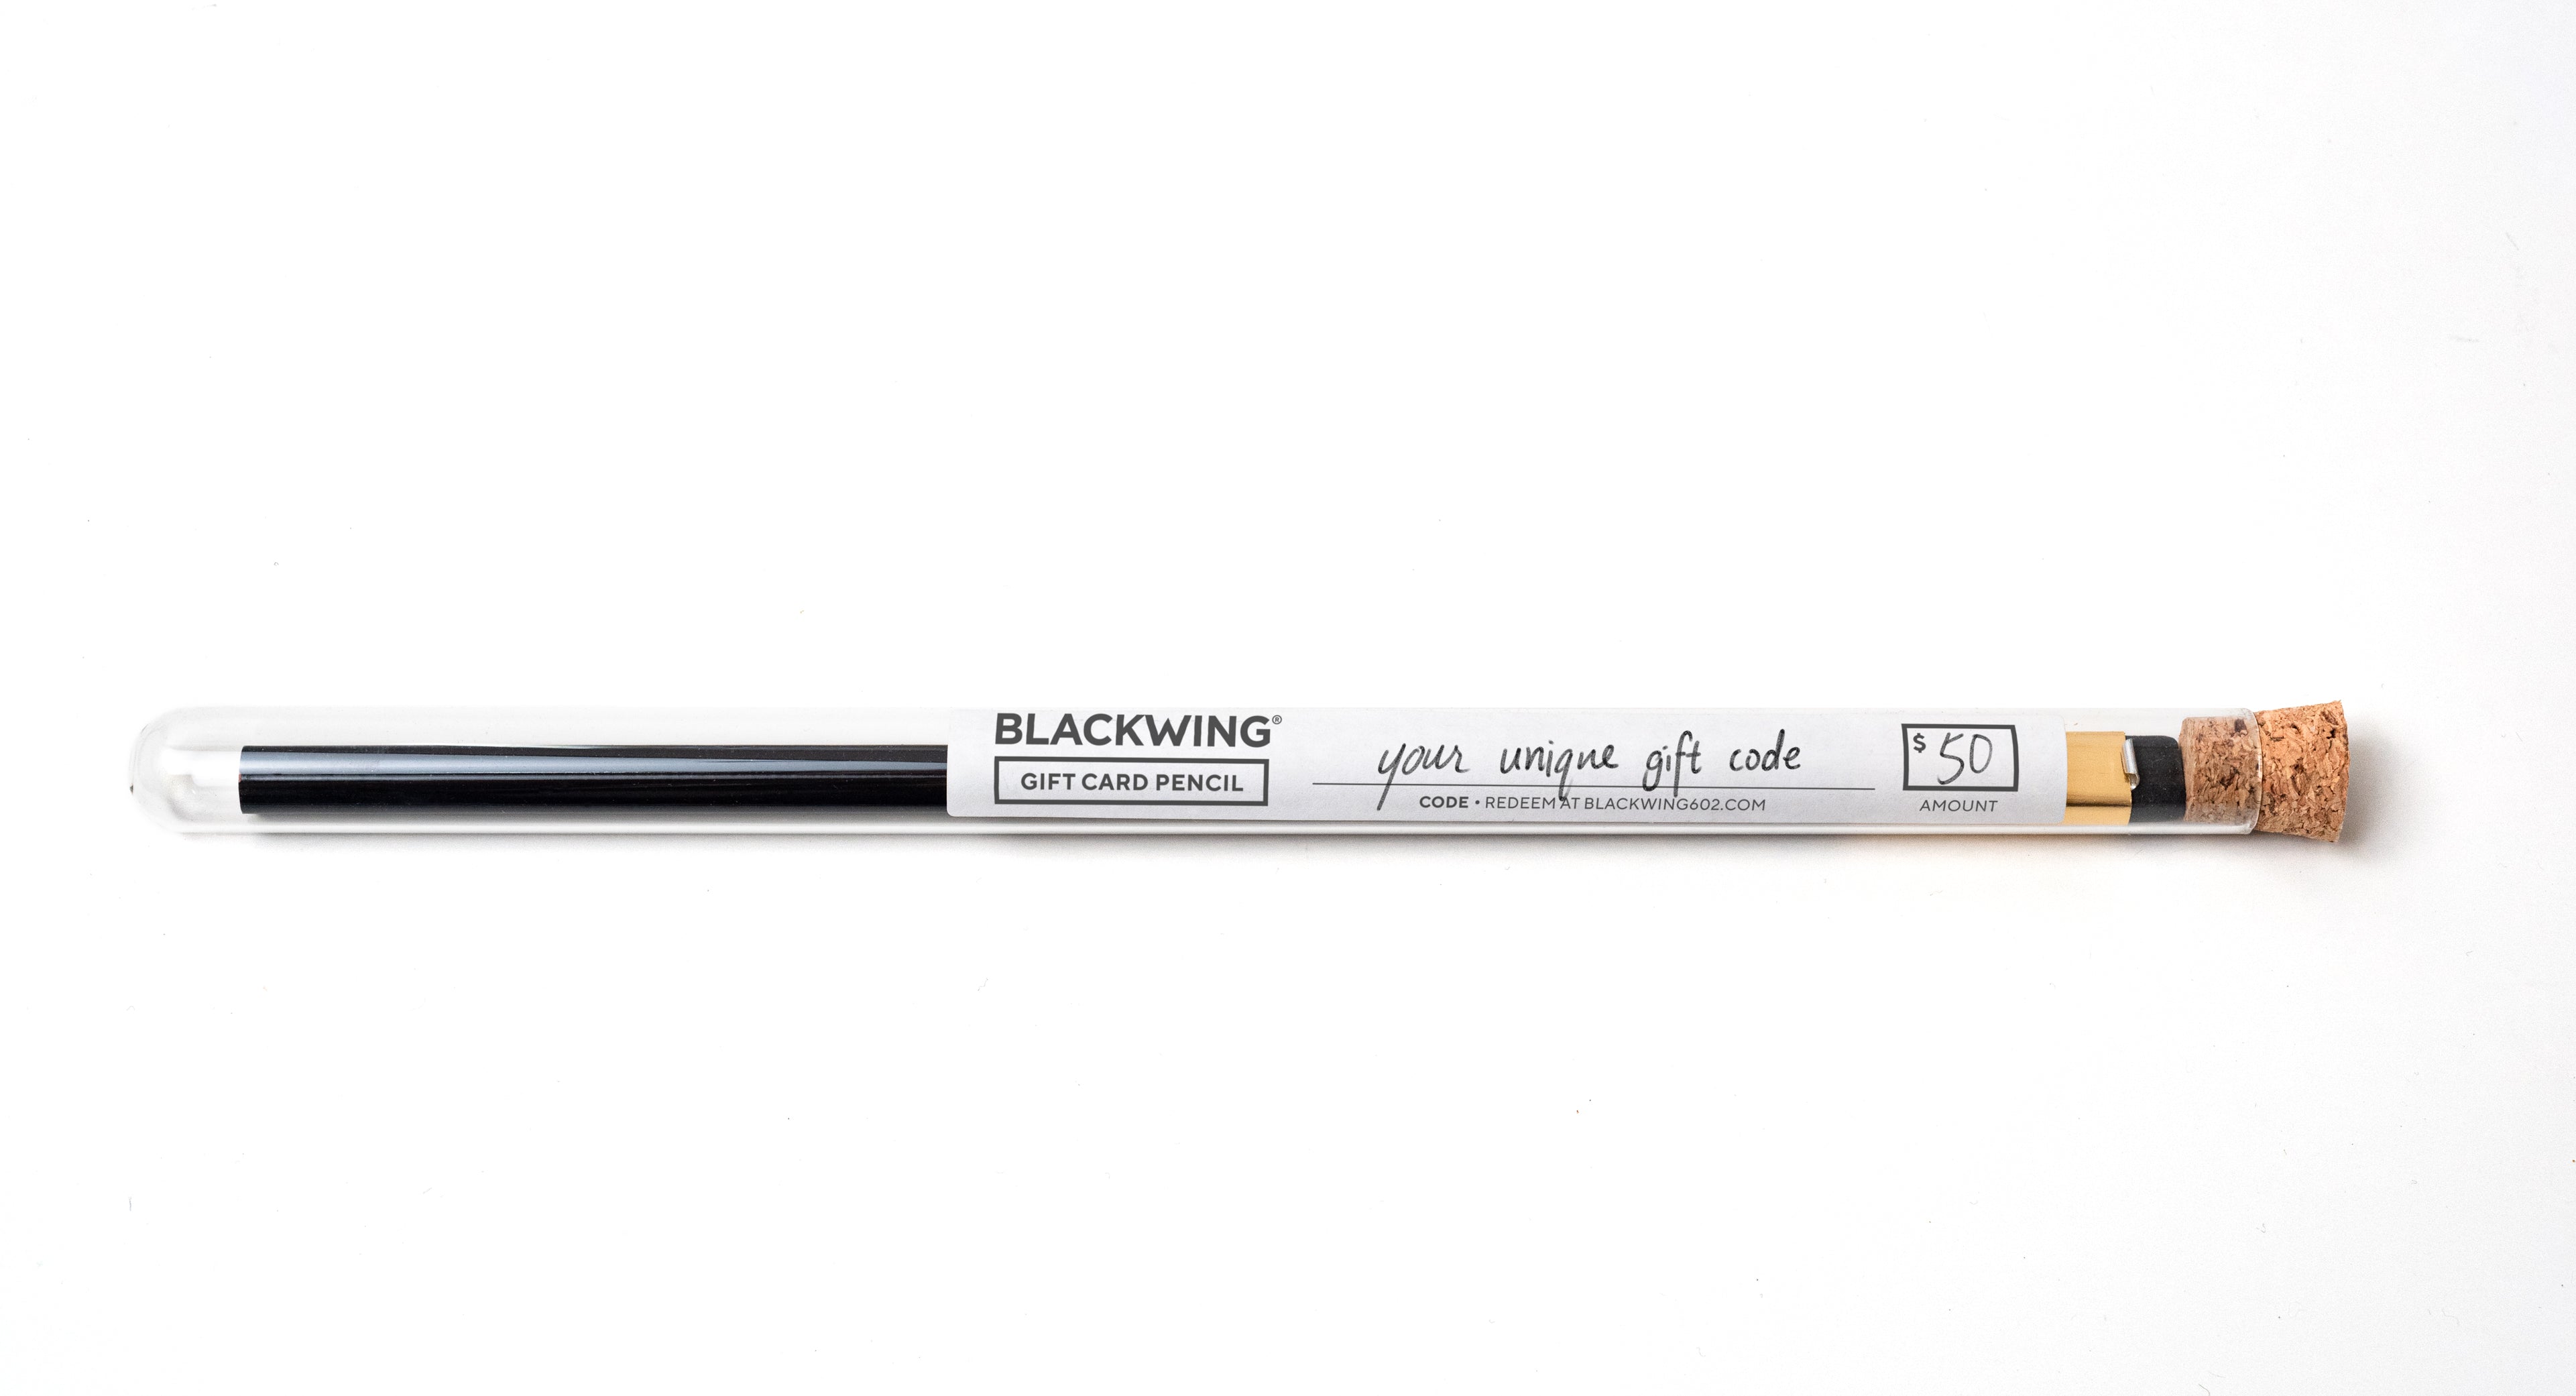 A Blackwing Gift Card Pencil with a black cap on a white surface.